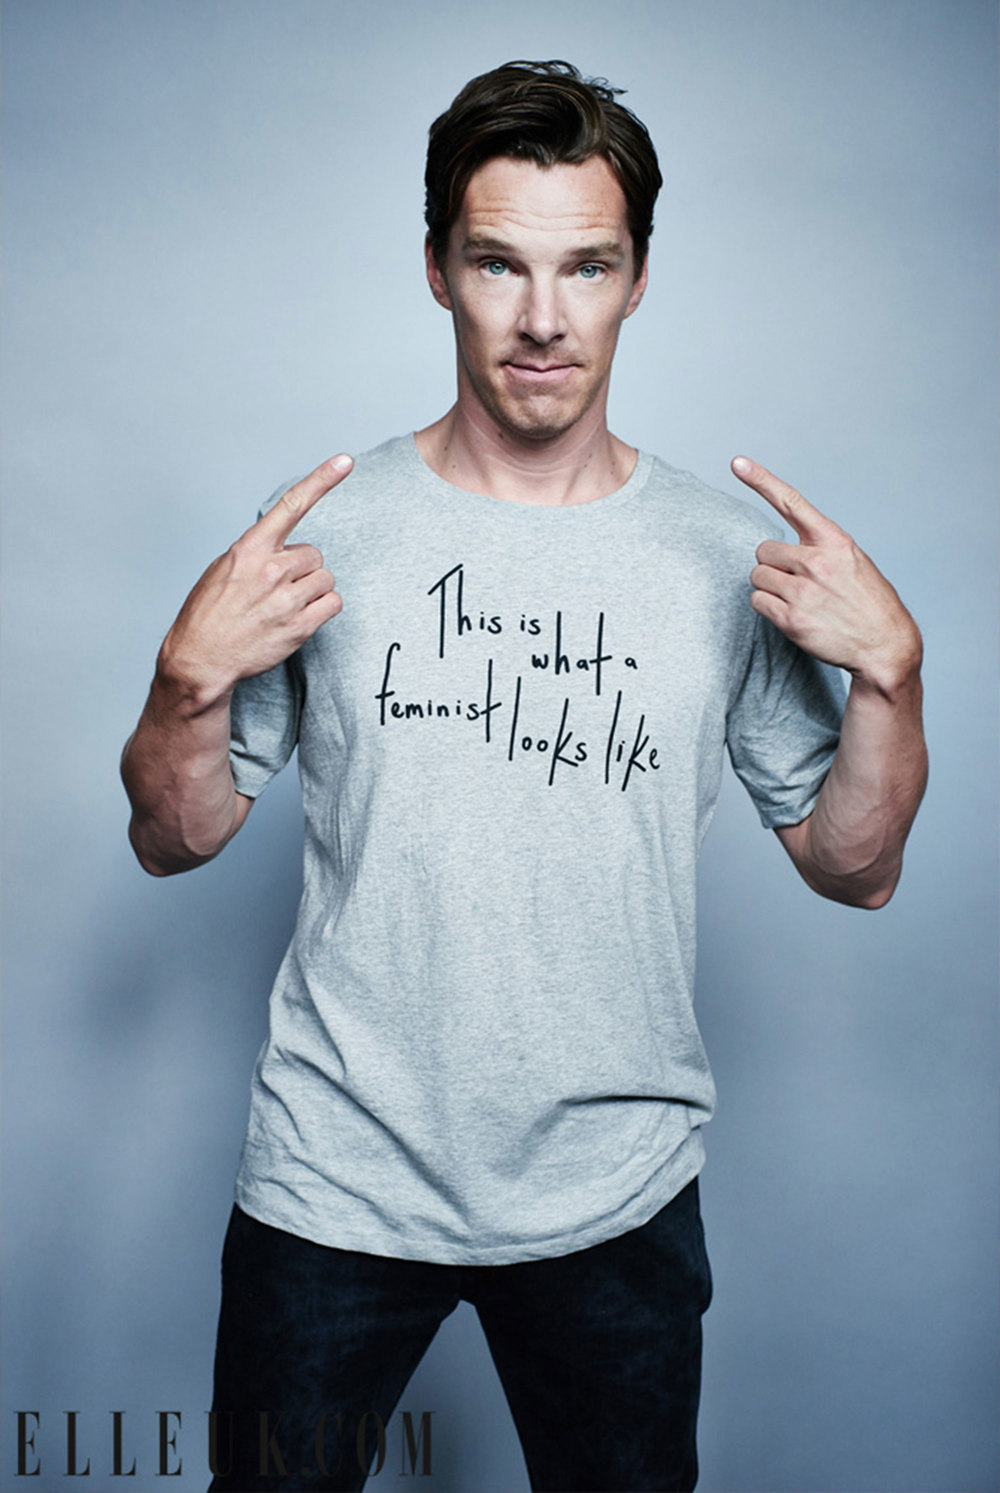 10 facts about Benedict Cumberbatch, Dr. Strange